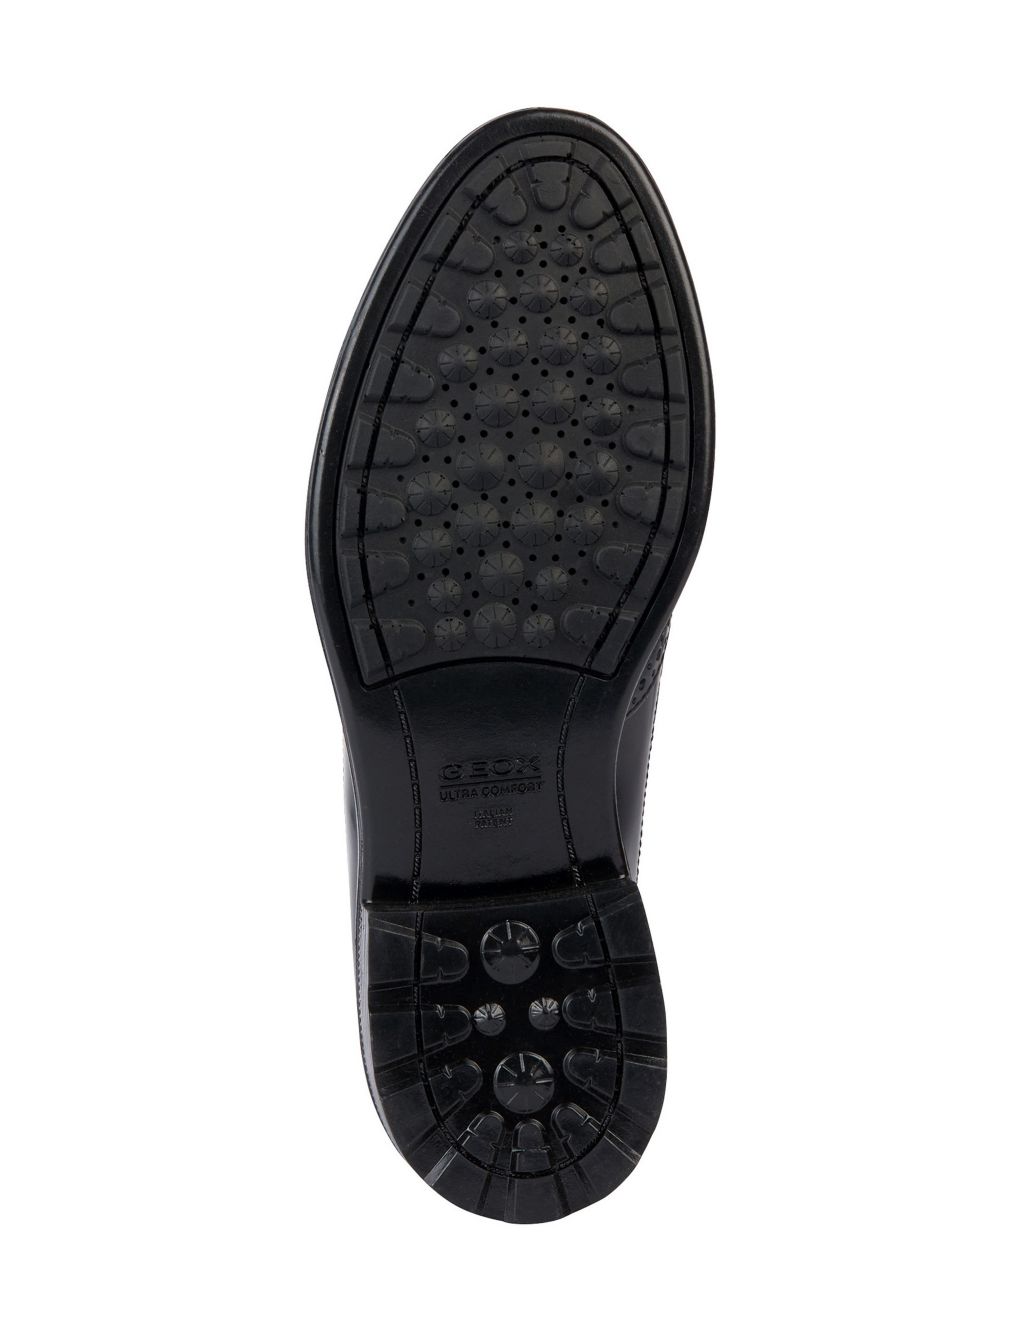 Leather Lace Up Brogues image 6